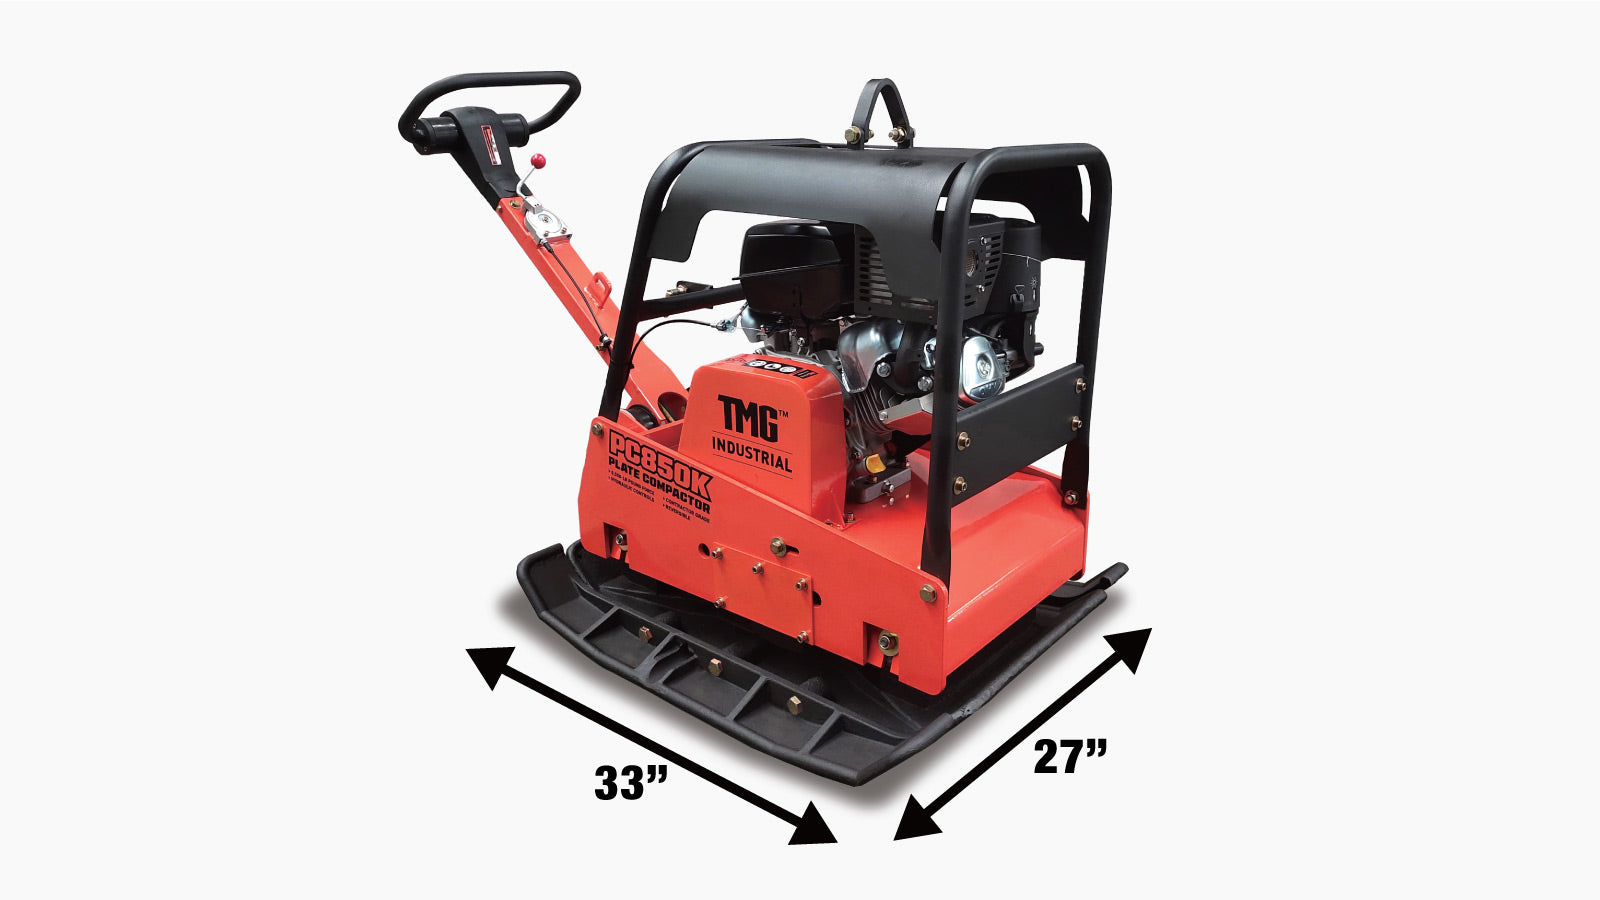 TMG Industrial 8,550-lb Reversible Hydraulic Plate Compactor, 14 HP Kohler CH440 Engine, 260-kg Net Weight , Hydraulic Control, TMG-PC850K-specifications-image